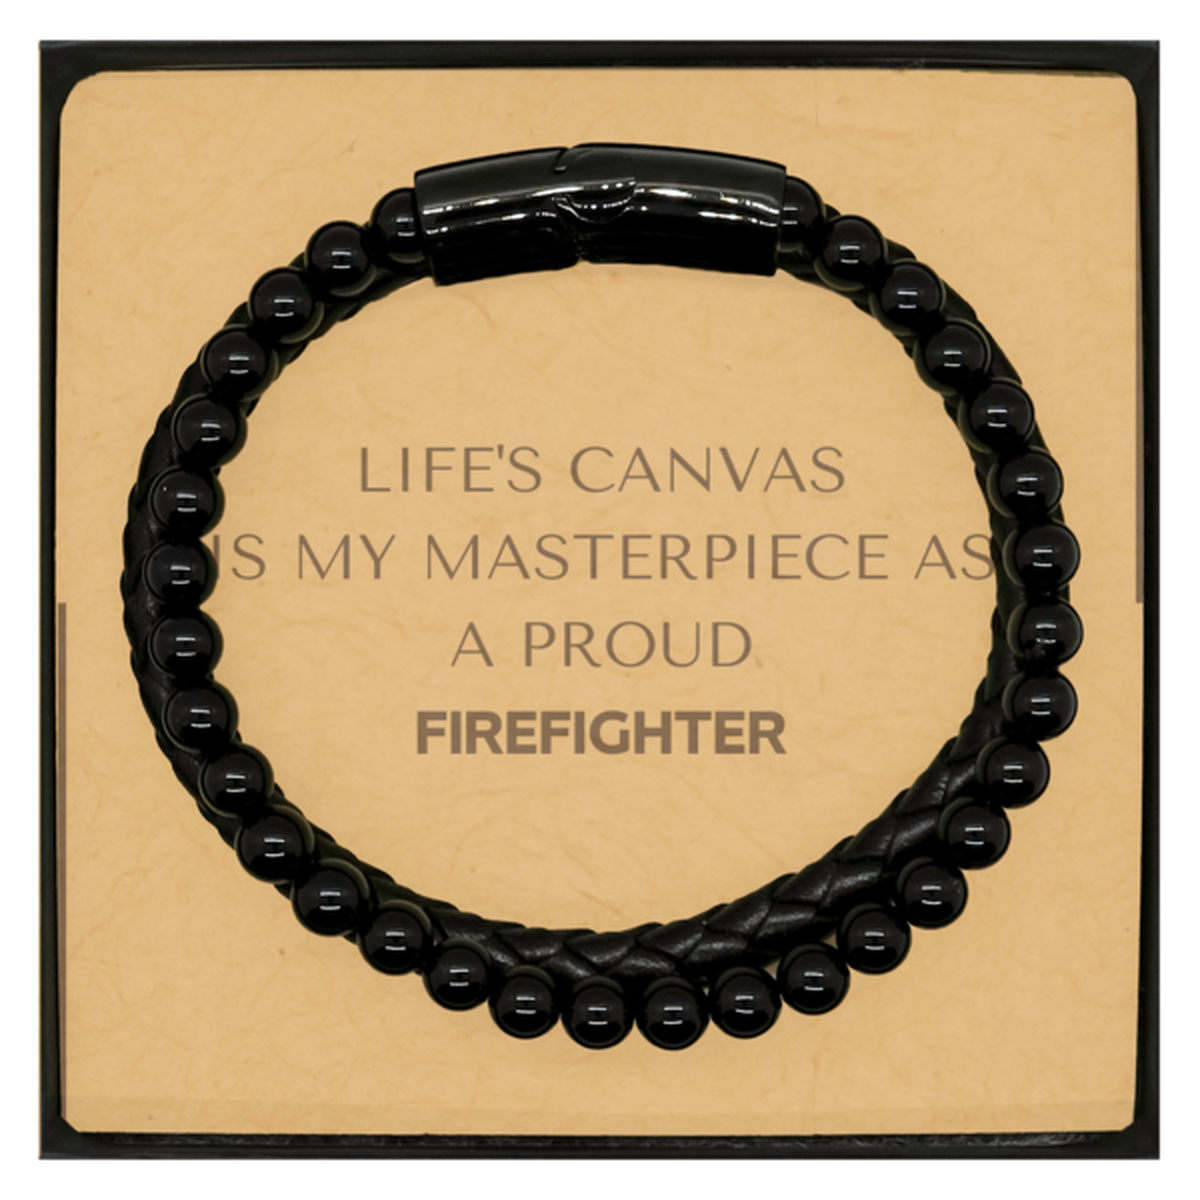 Proud Firefighter Gifts, Life's canvas is my masterpiece, Epic Birthday Christmas Unique Stone Leather Bracelets For Firefighter, Coworkers, Men, Women, Friends